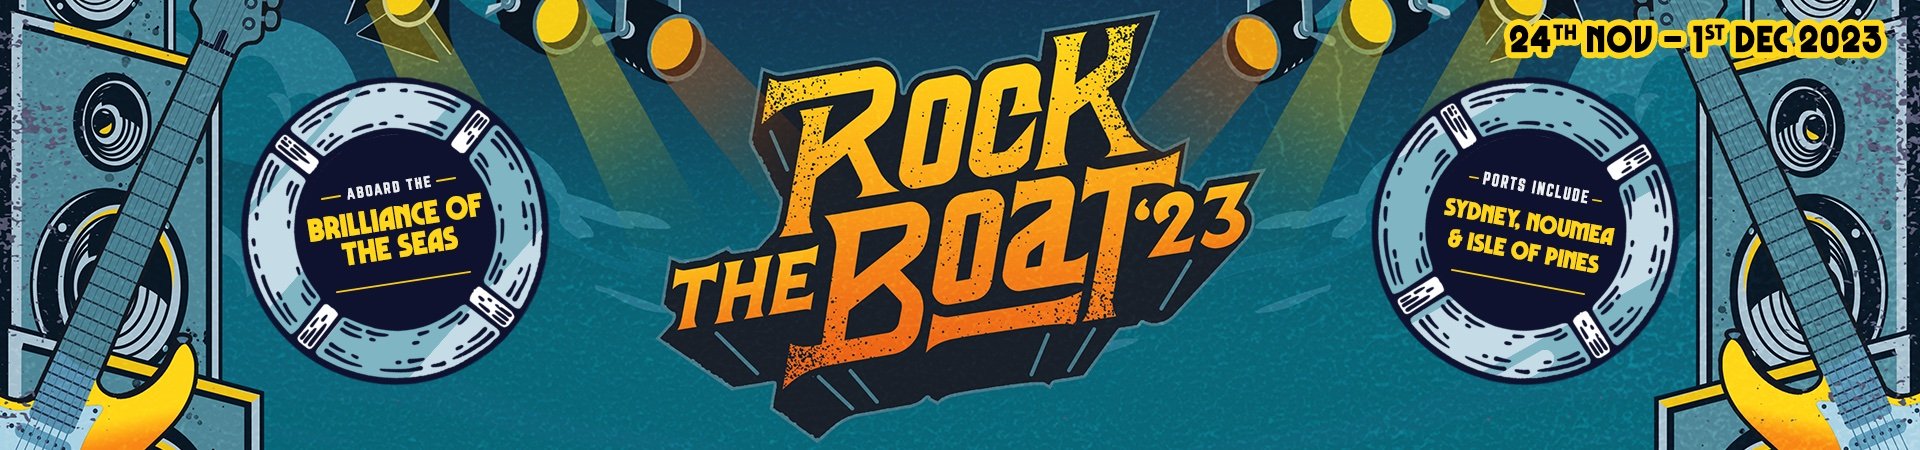 ROCK THE BOAT 2023